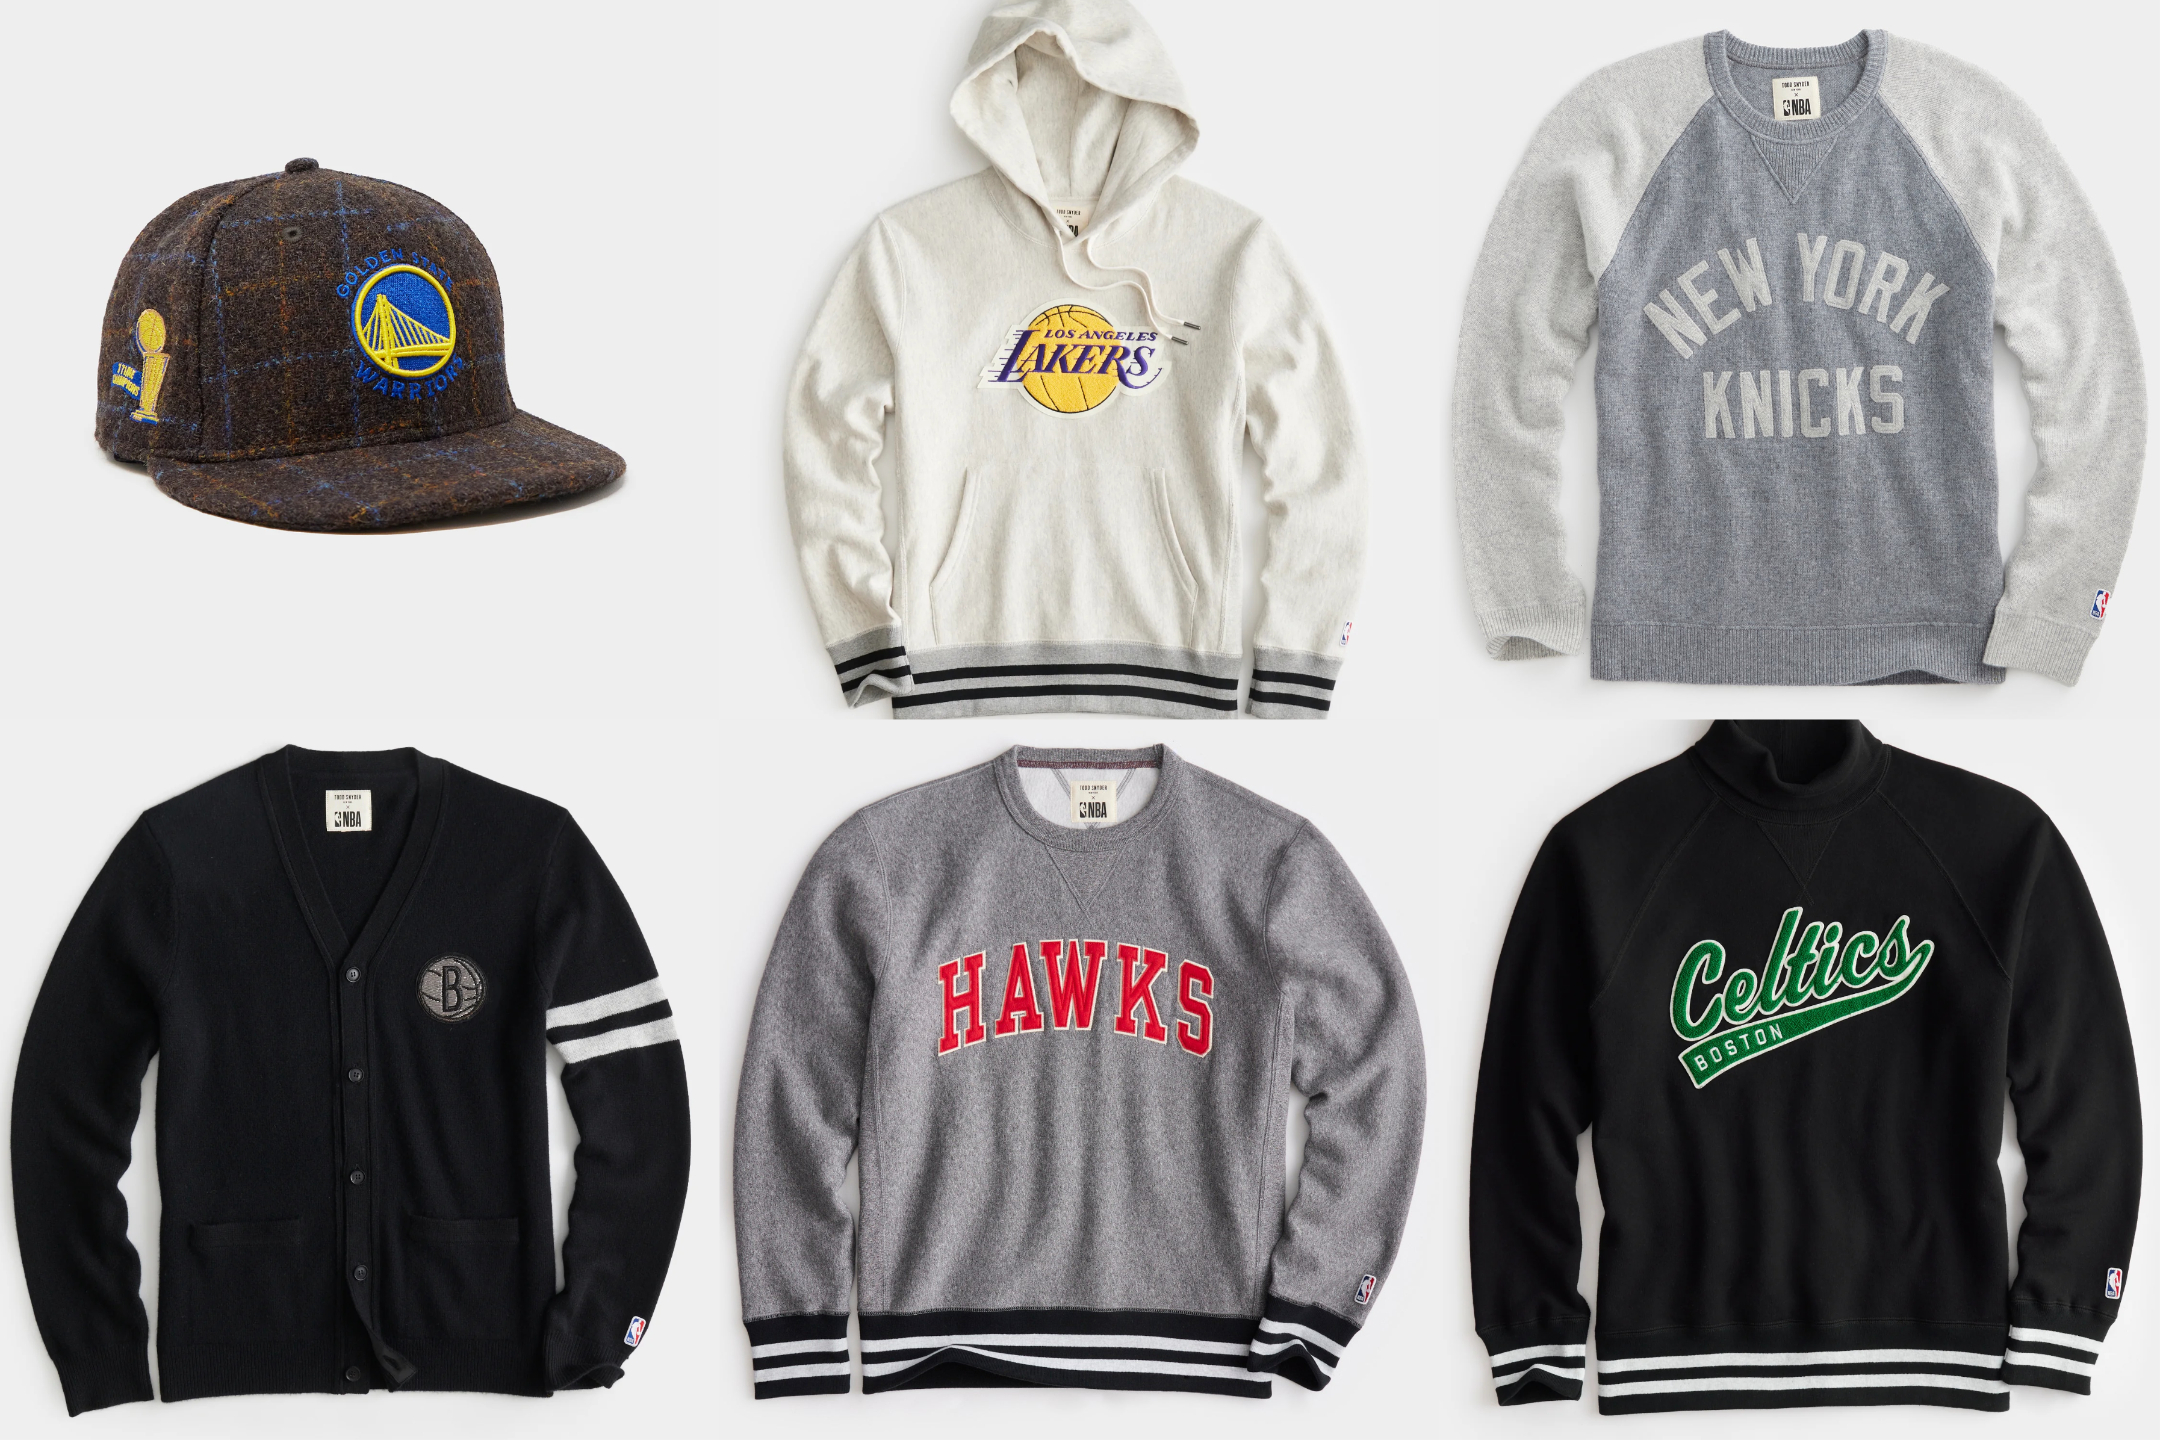 Todd Snyder x NBA Courtside Collection Release Date, Prices, Where